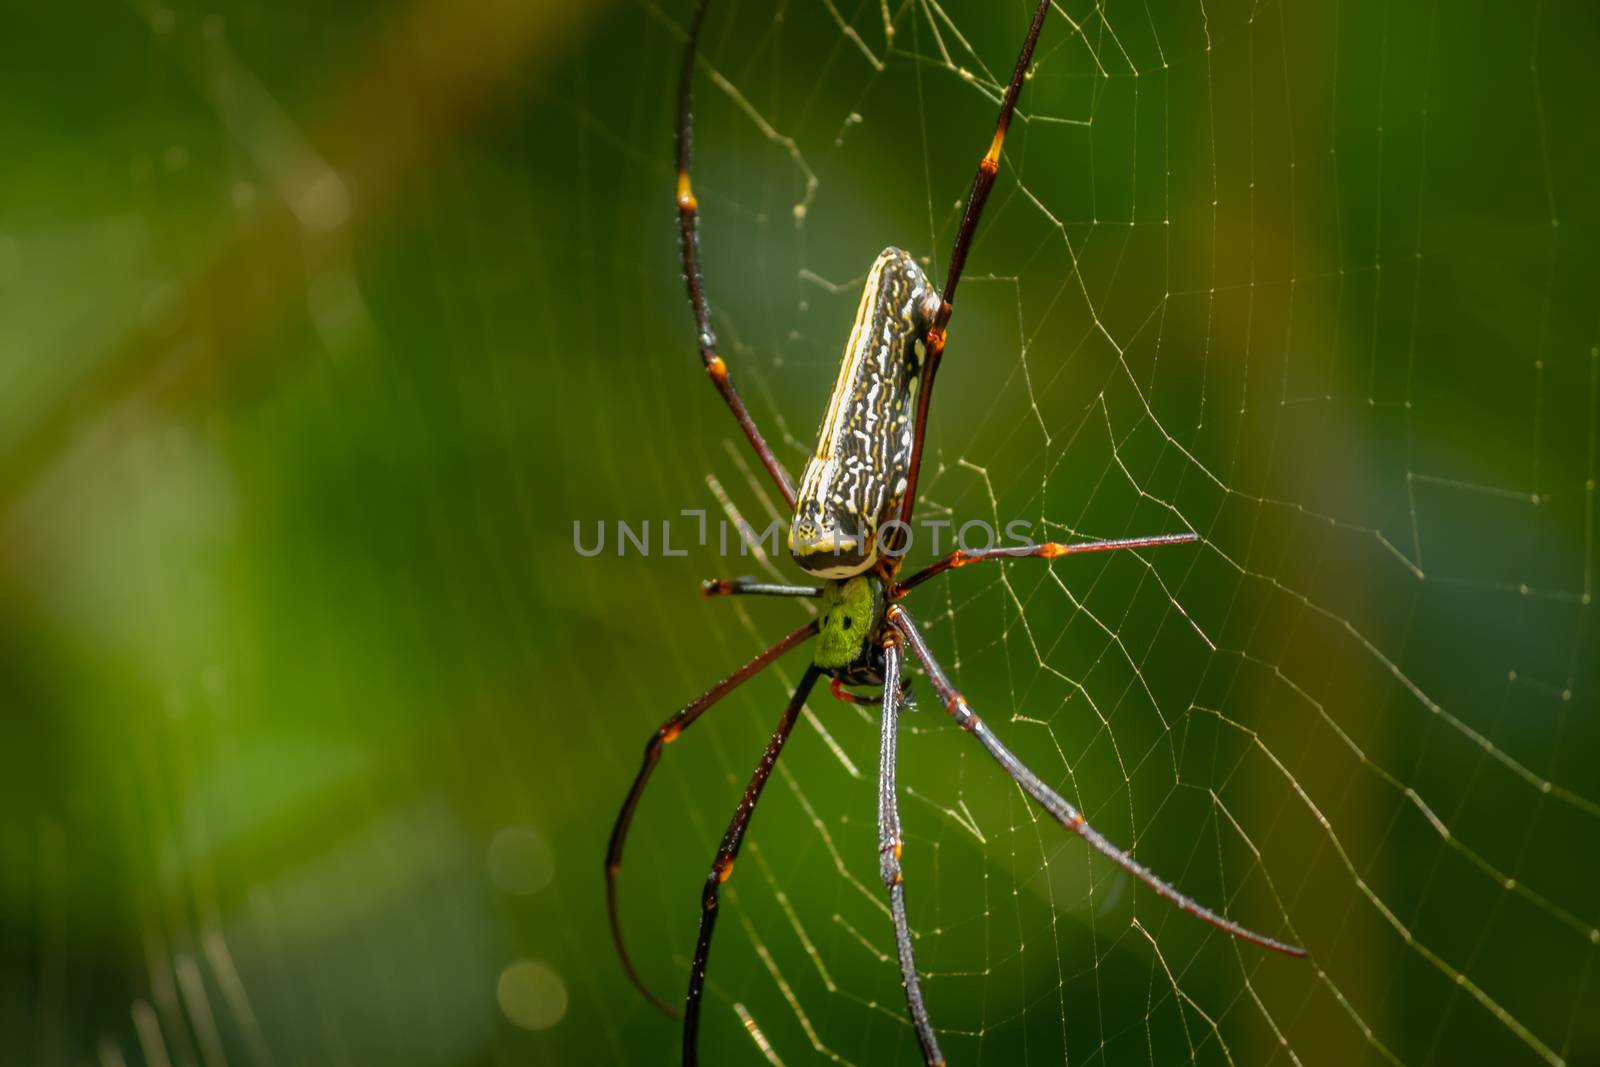 Red-Legged Golden Orb Spider Close up, sunlight hitting on its body, forest background. by nilanka